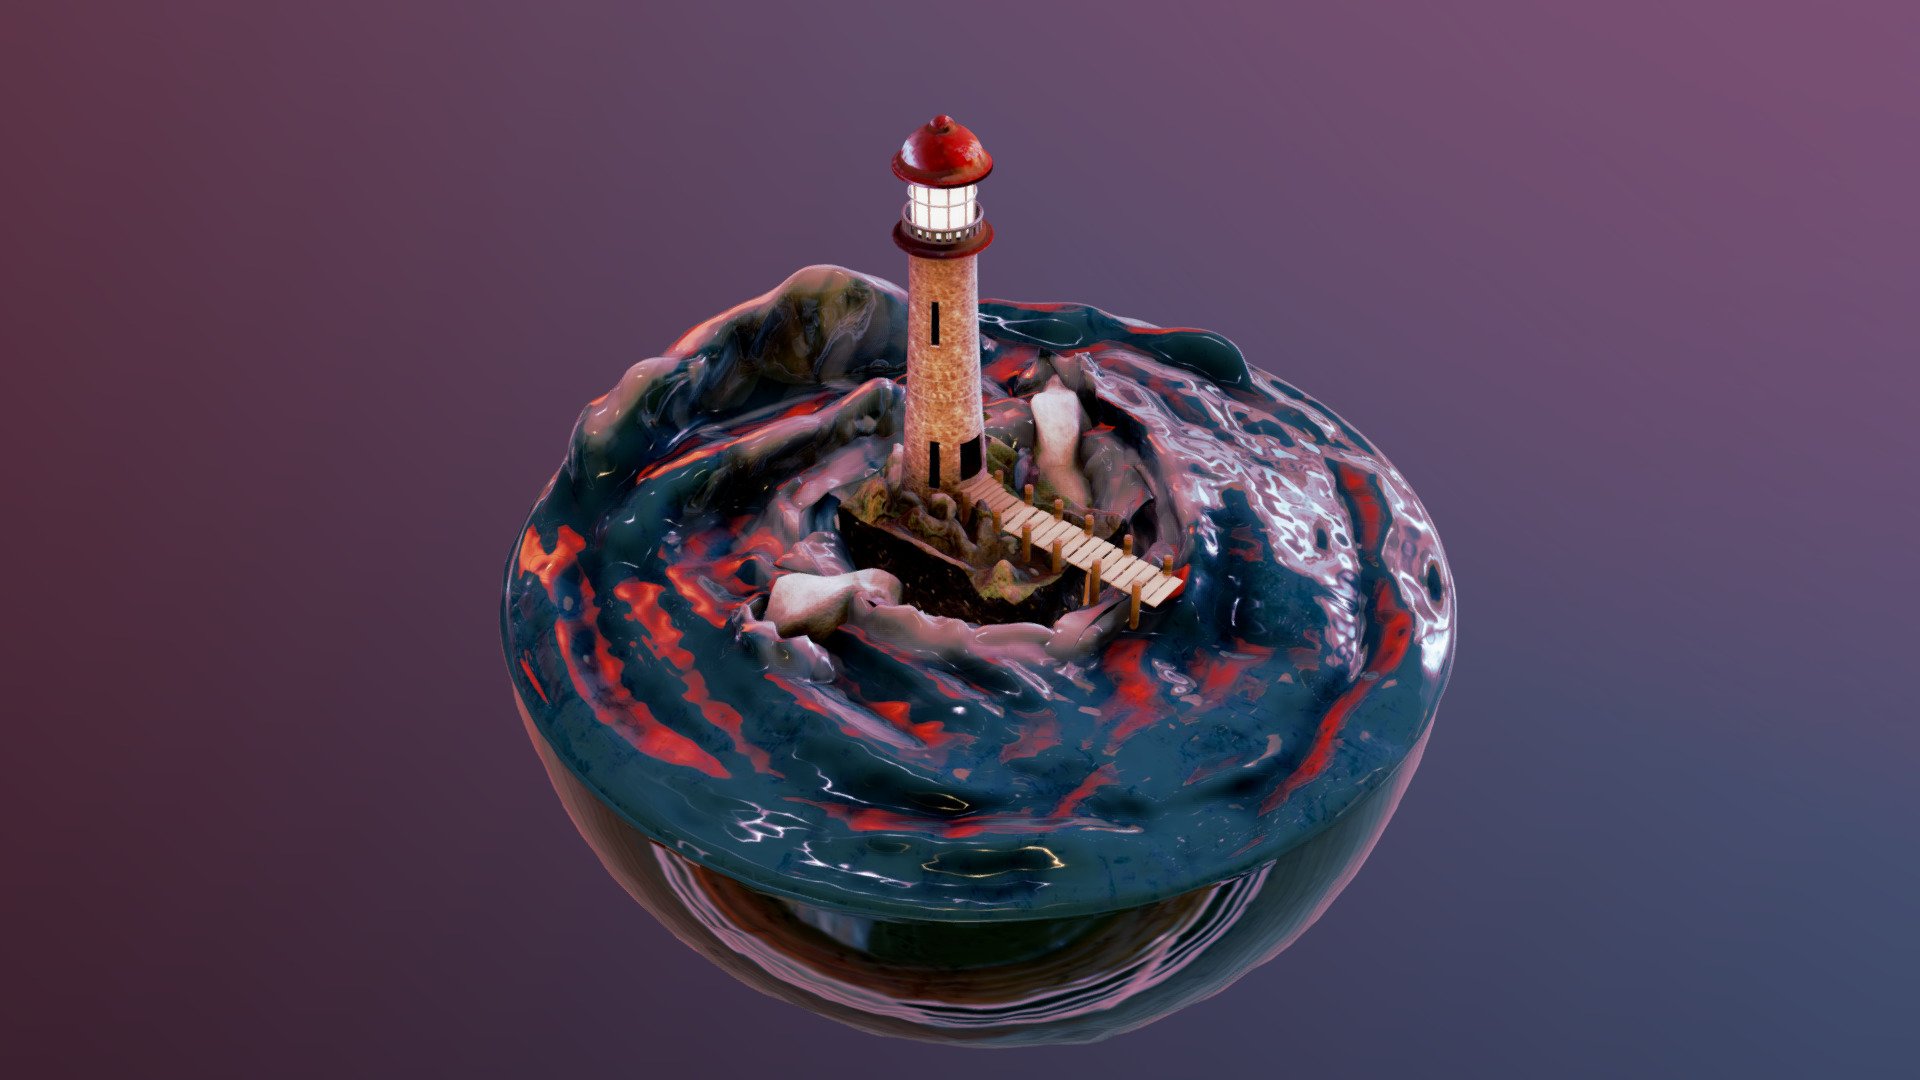 Small little project Ive been working on. Just been thinking about lighthouses and how crazy it must be building them with raging waters 3d model